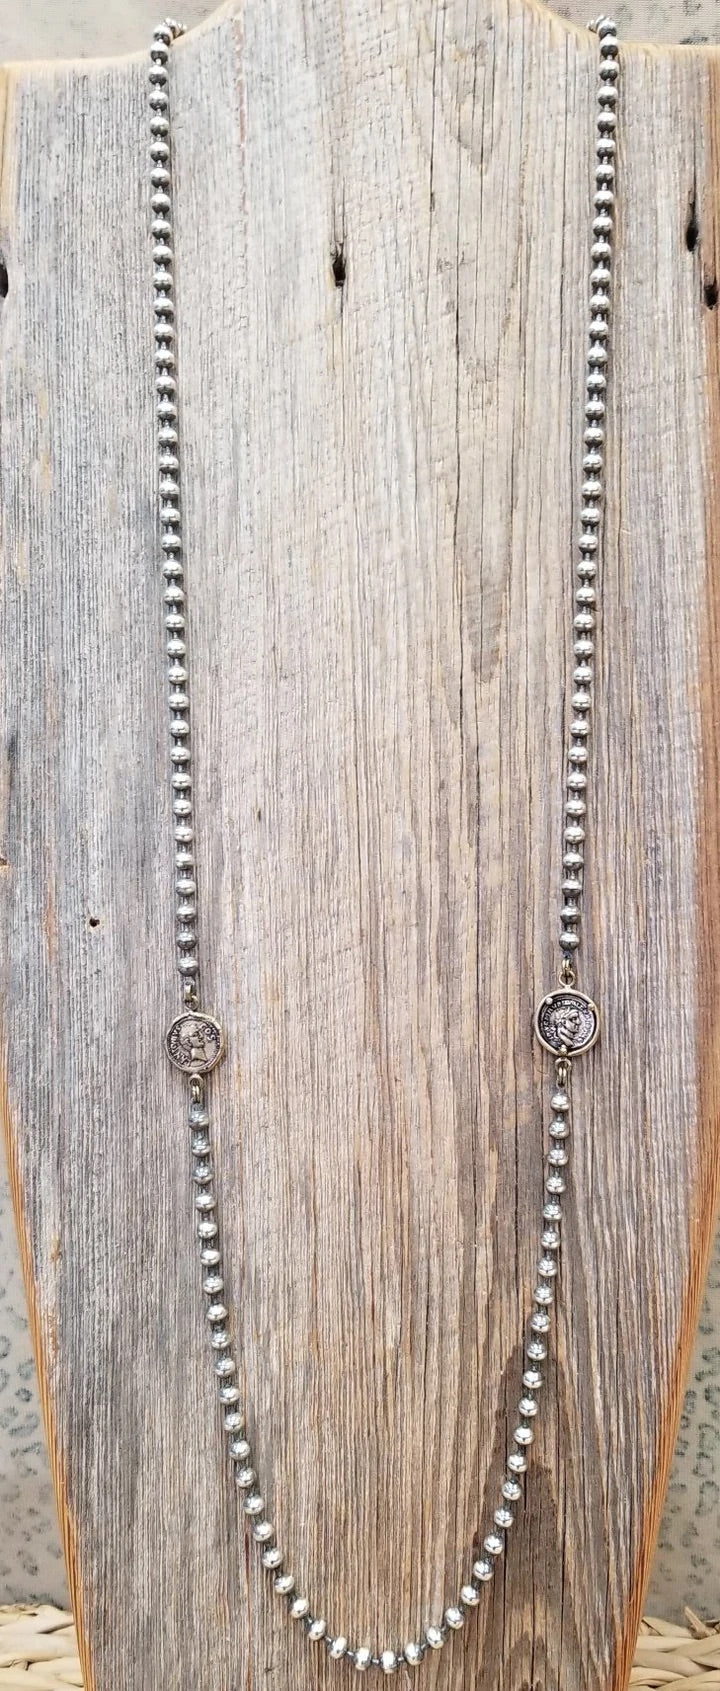 Zowee Necklace W/ Inline Coins